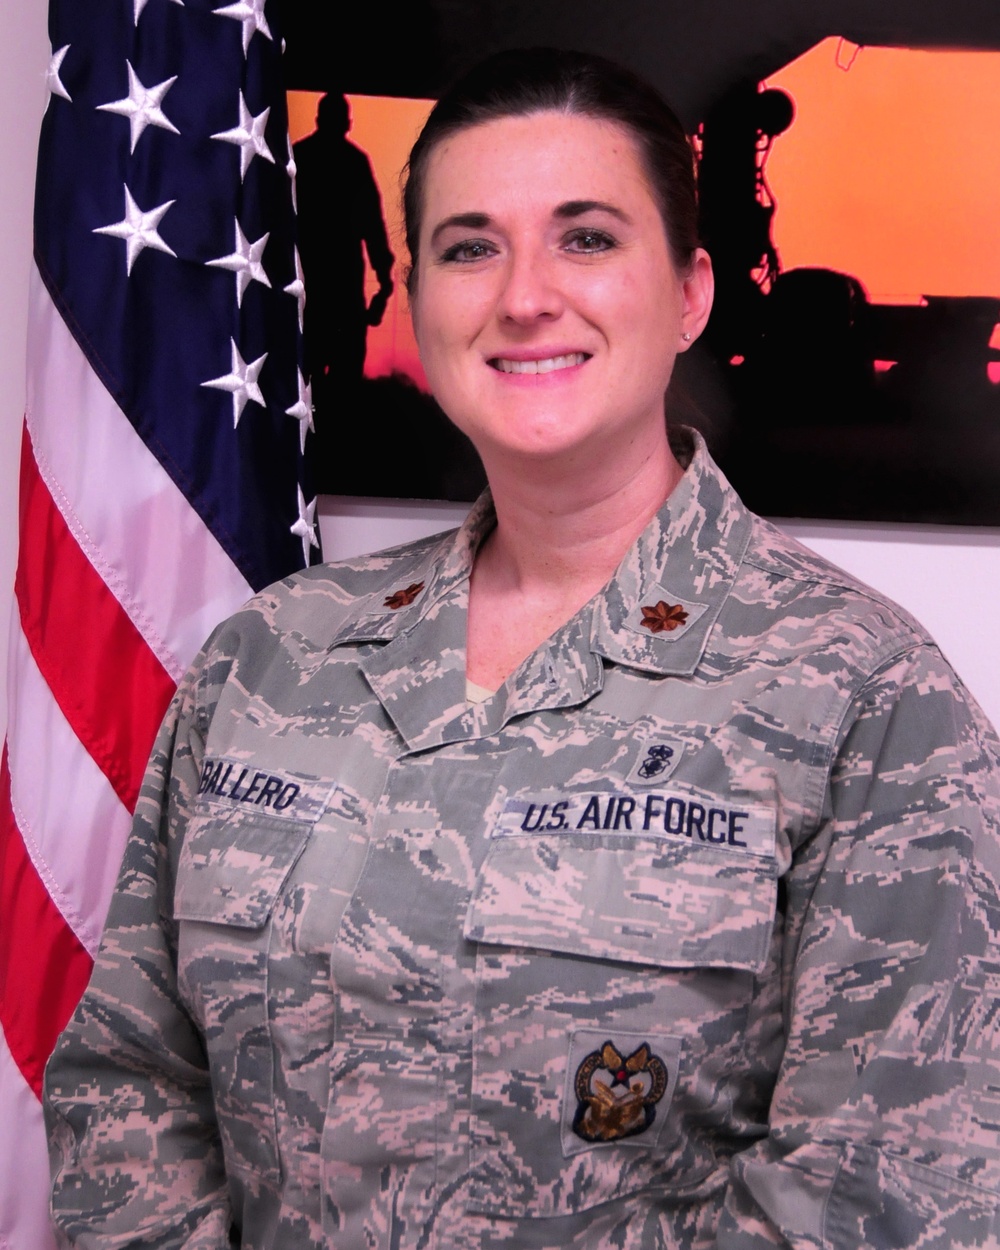 Van Ostberg-Caballero continues her military service with the Missouri Air National Guard